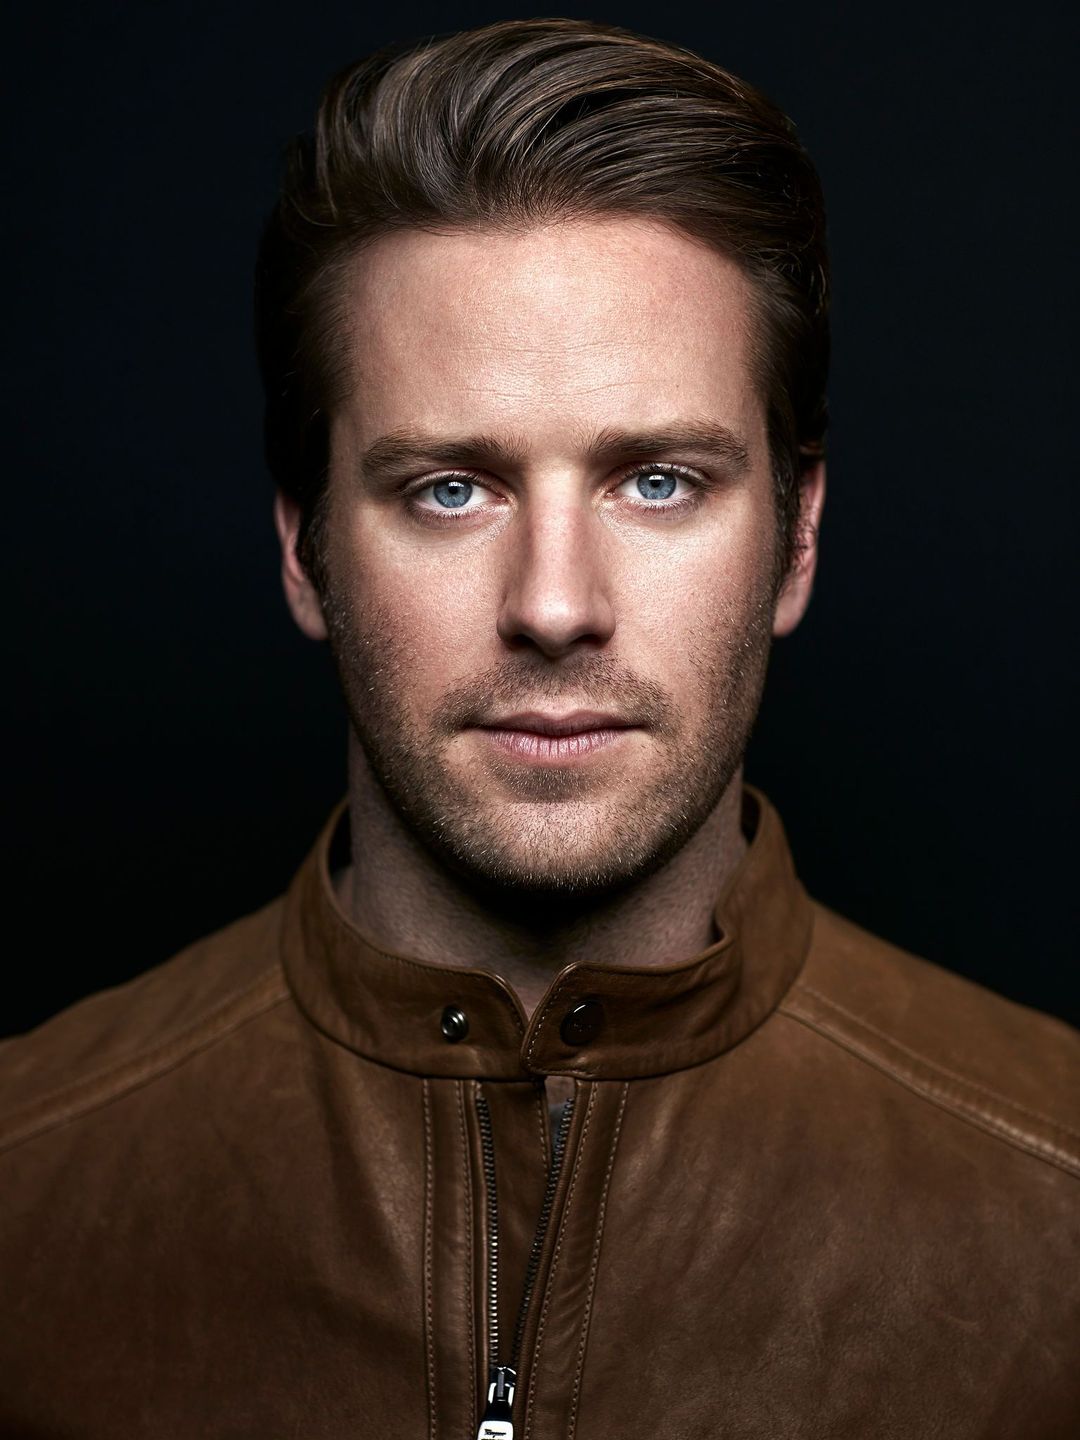 Armie Hammer how did he became famous